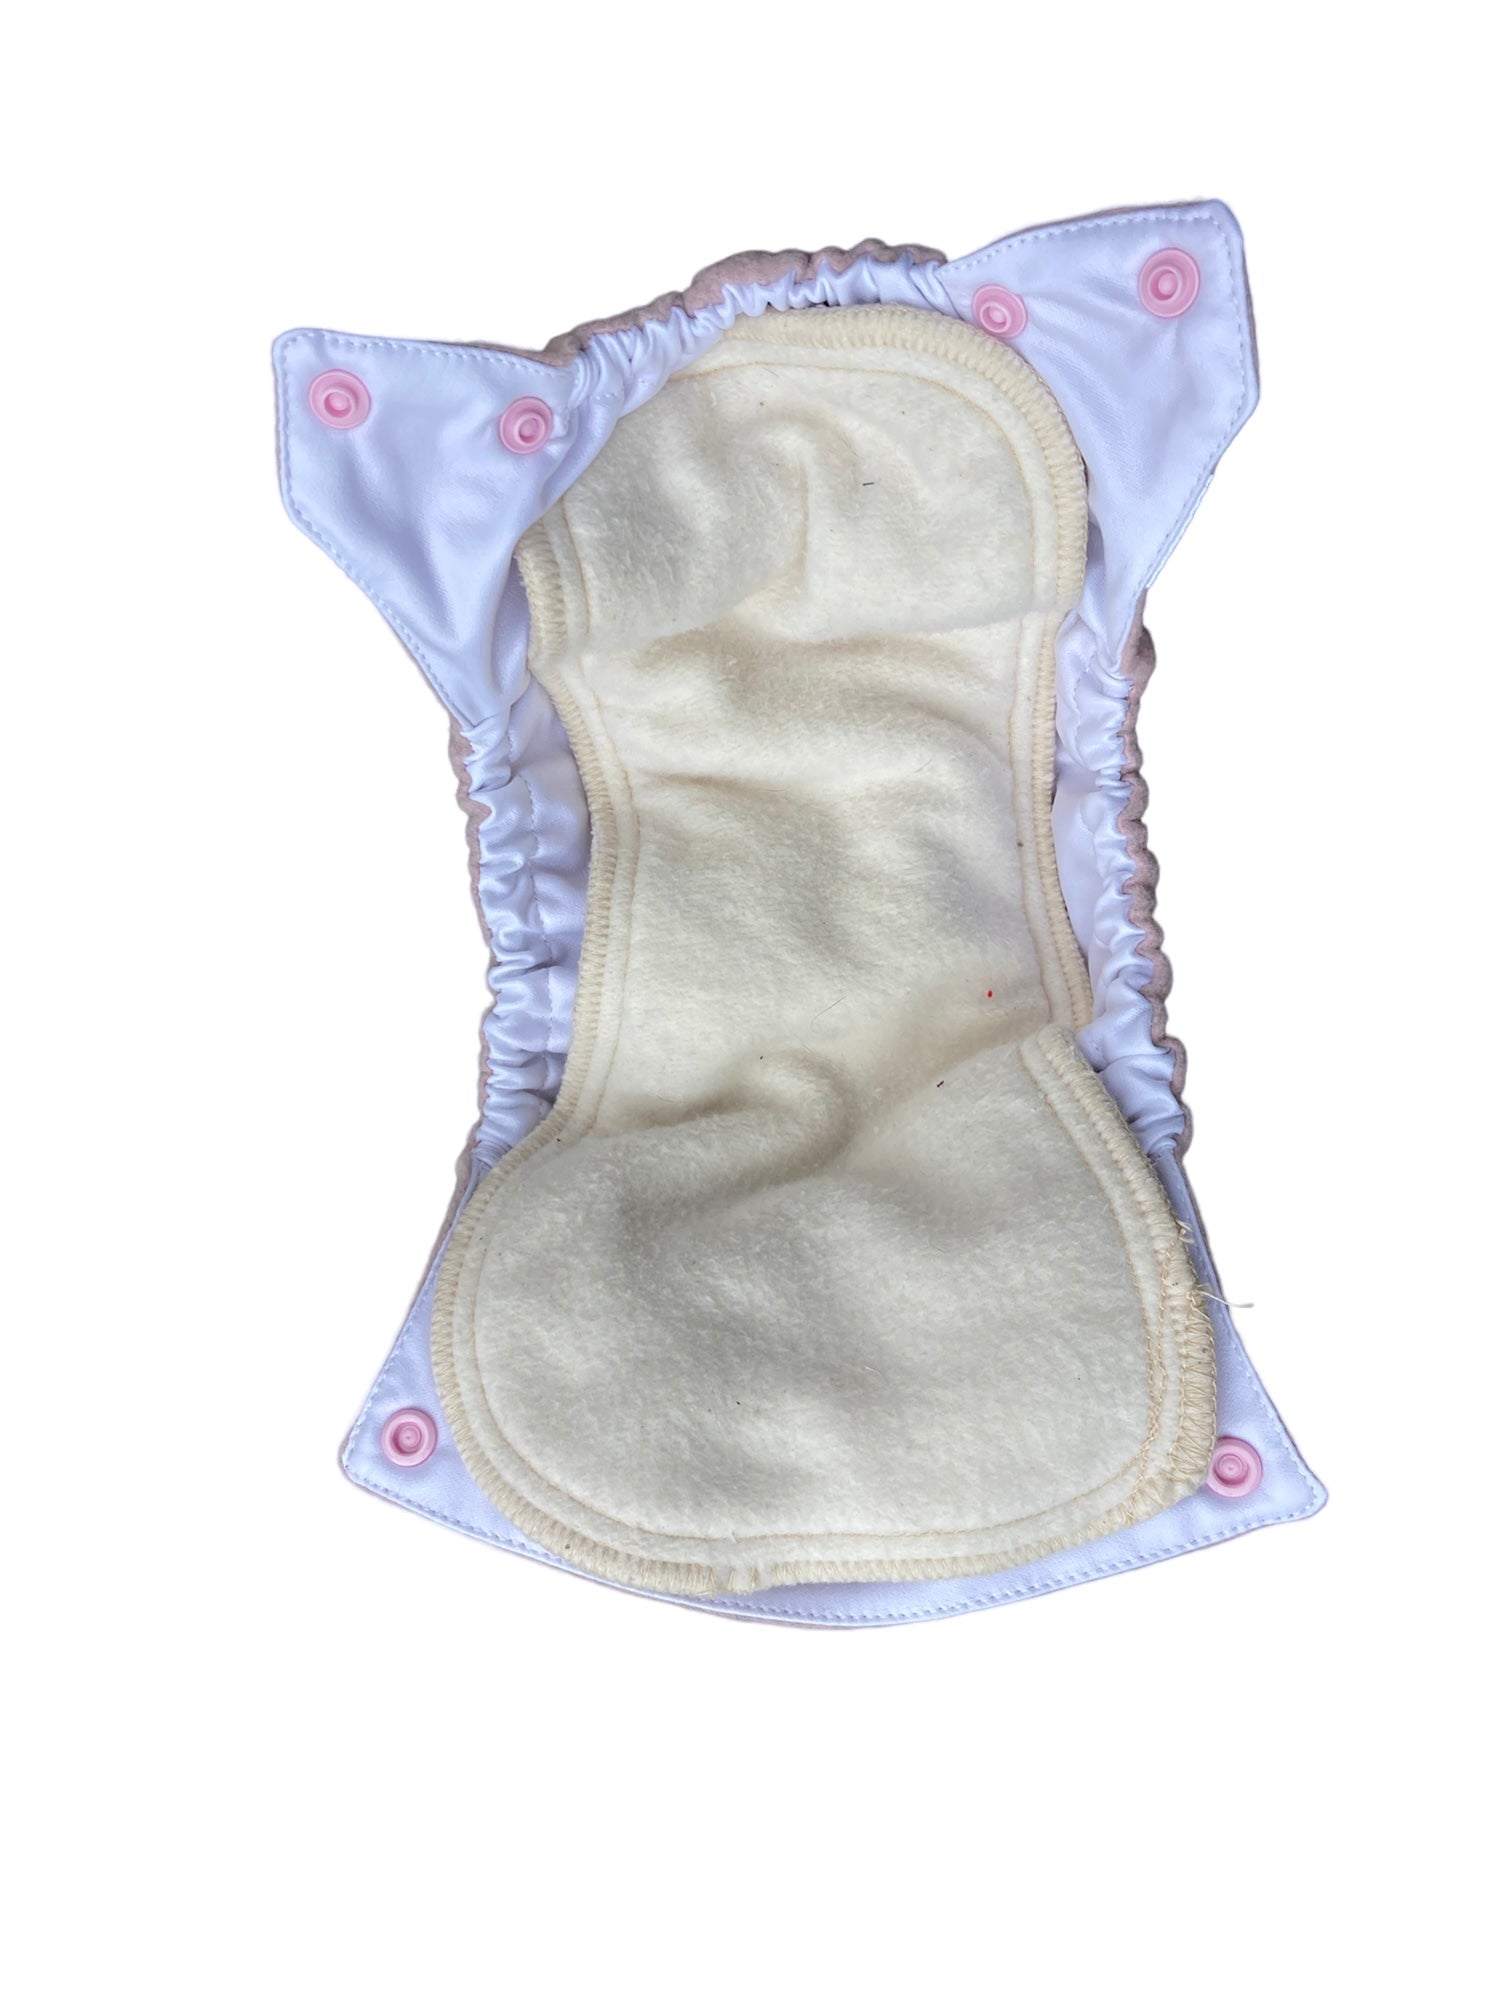 Heathered Blush Fleece All-In-Two Flappy-Nappy Diaper Cover